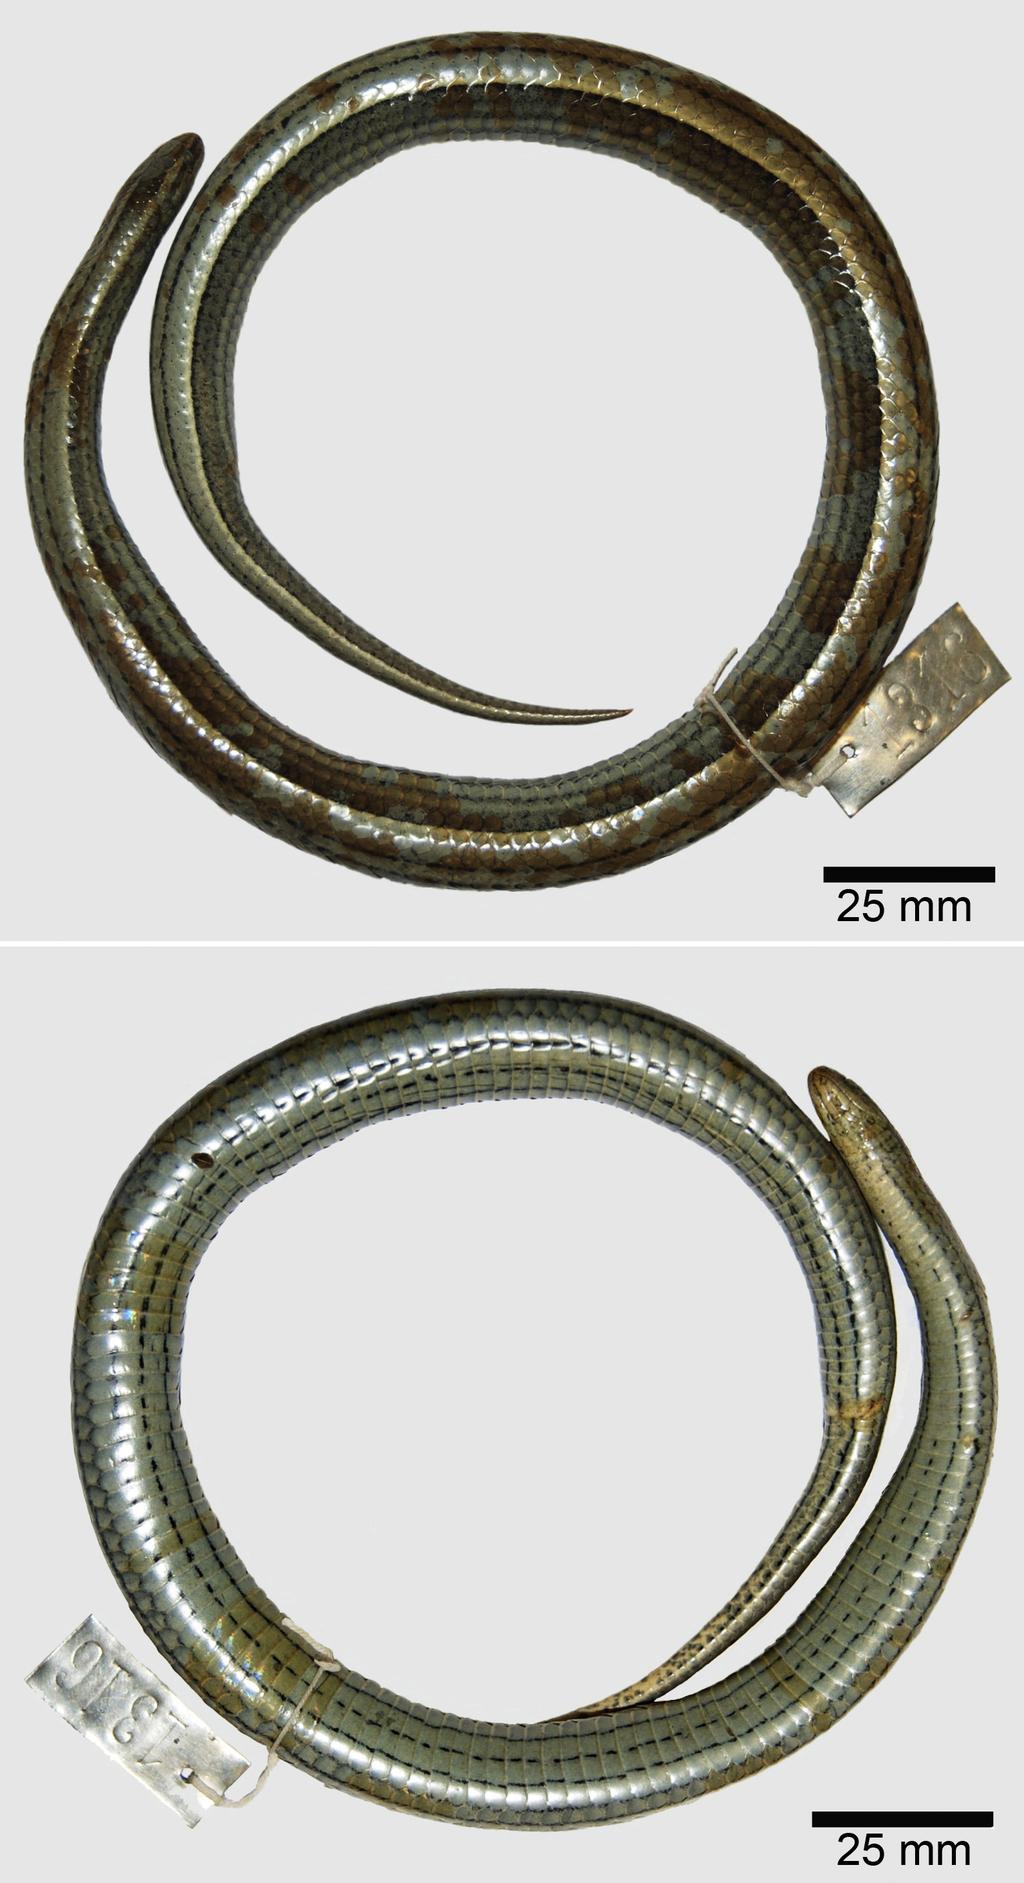 Morphological variation of Gomesophis brasiliensis and Ptychophis flavovirgatus Redescription of the holotype (Figs 5 6): Adult female, SVL 466 mm; head length 14.